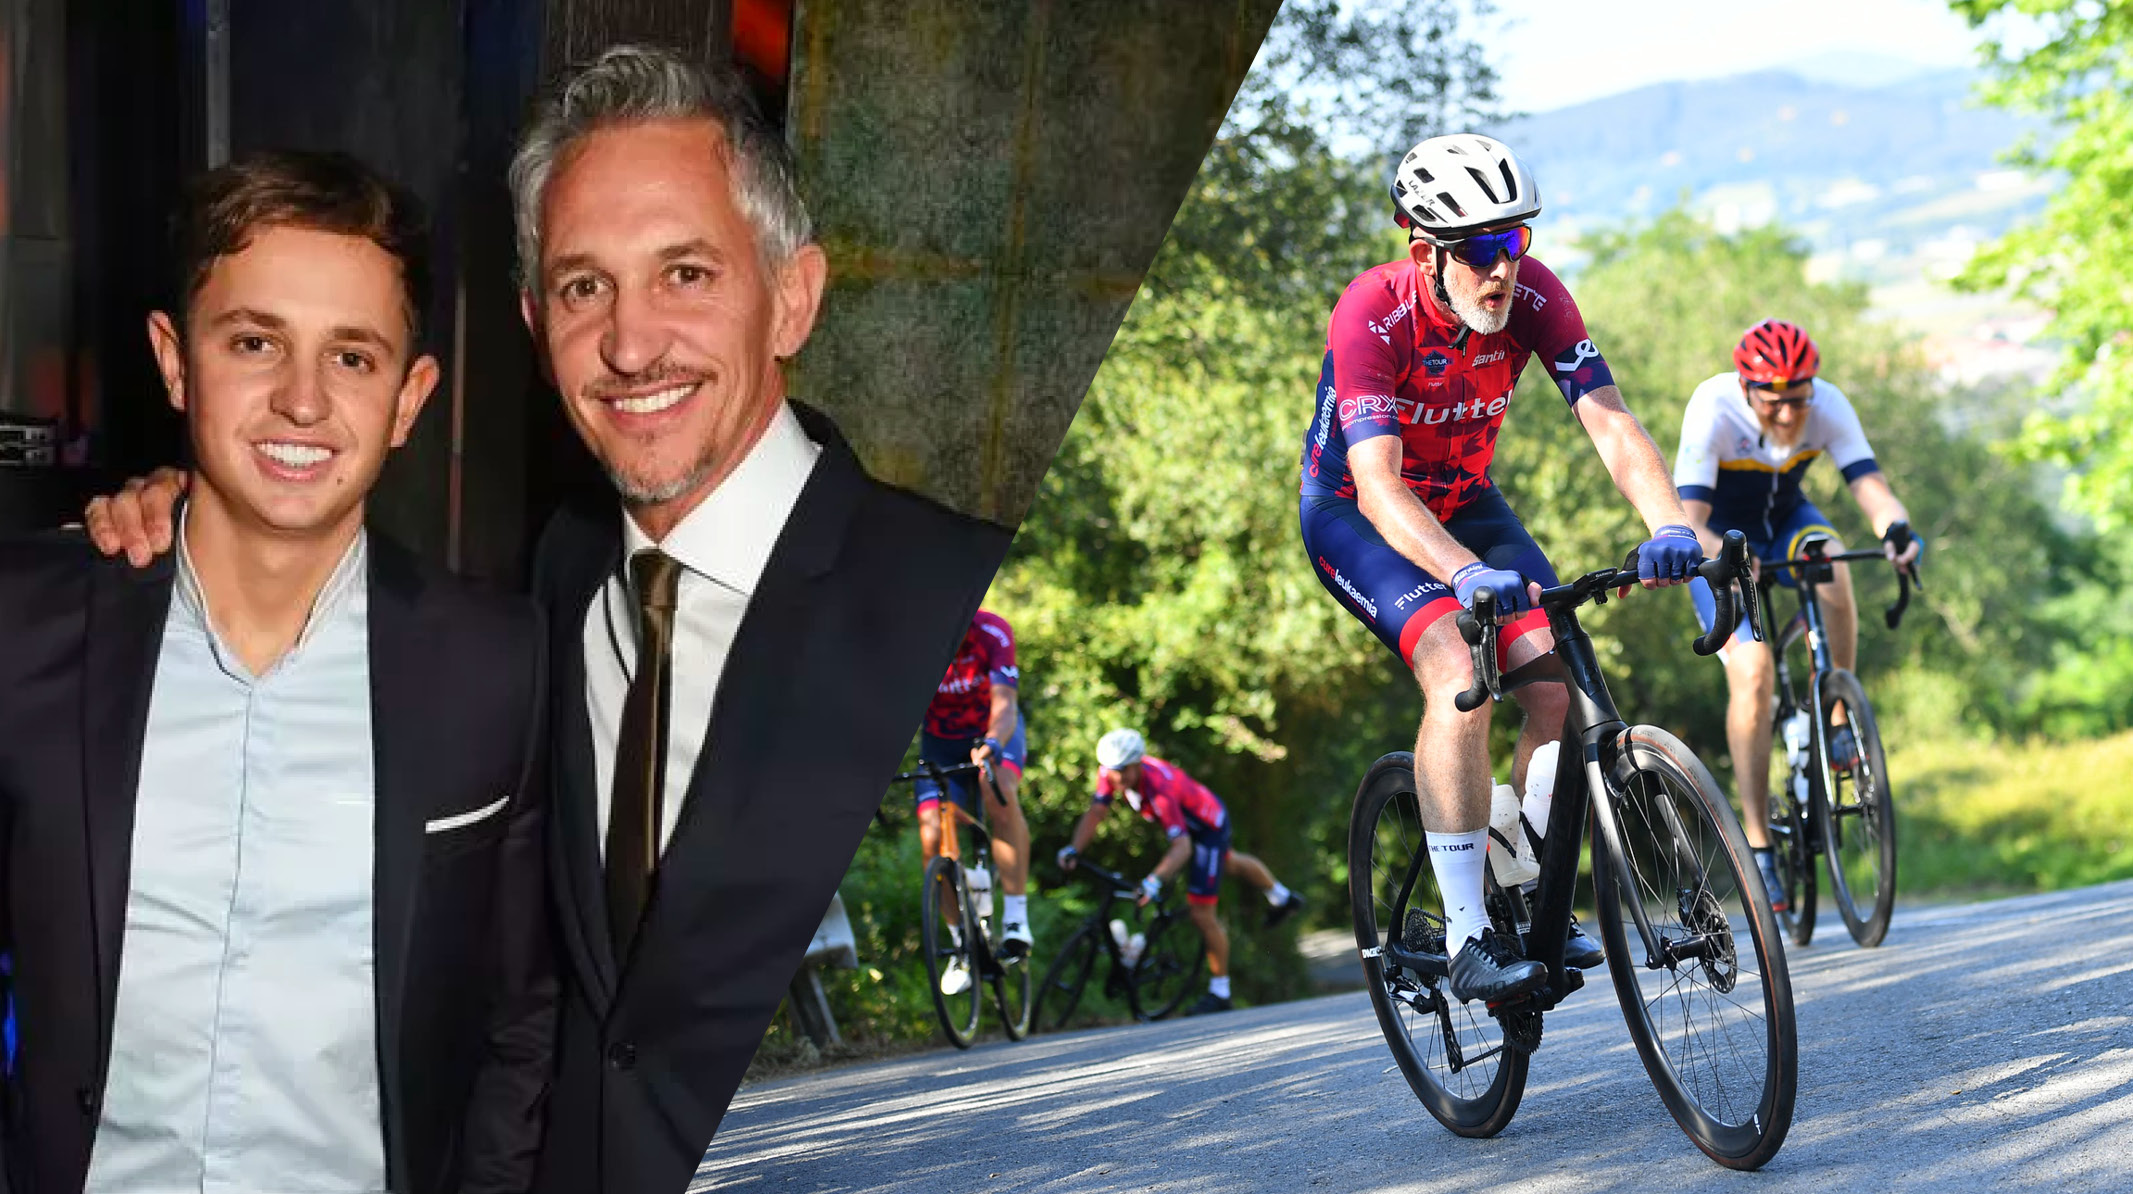 Gary Lineker Lends Support to Professor Rob Wynn and The Tour 21 Team